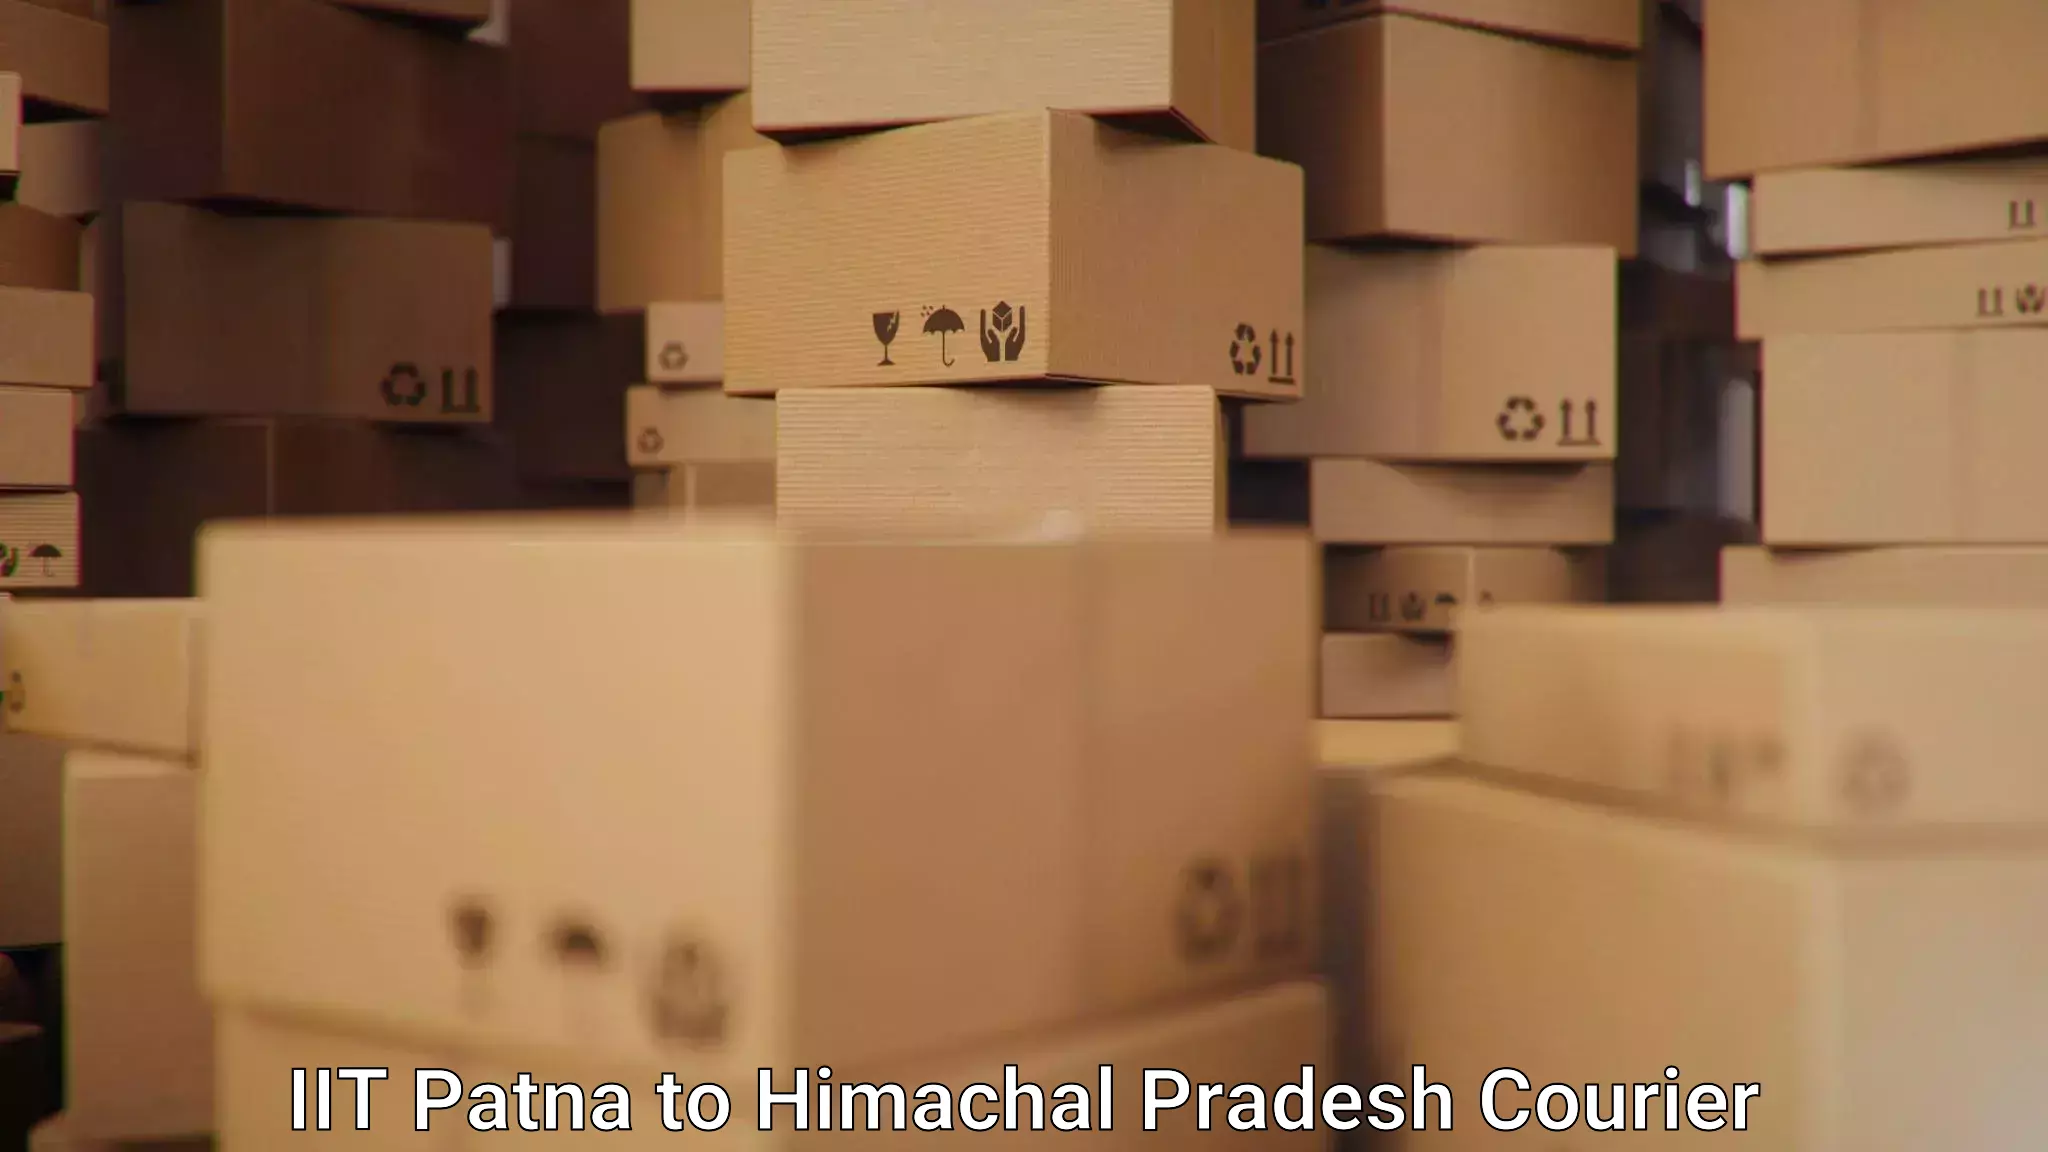 Full-service courier options IIT Patna to Himachal Pradesh